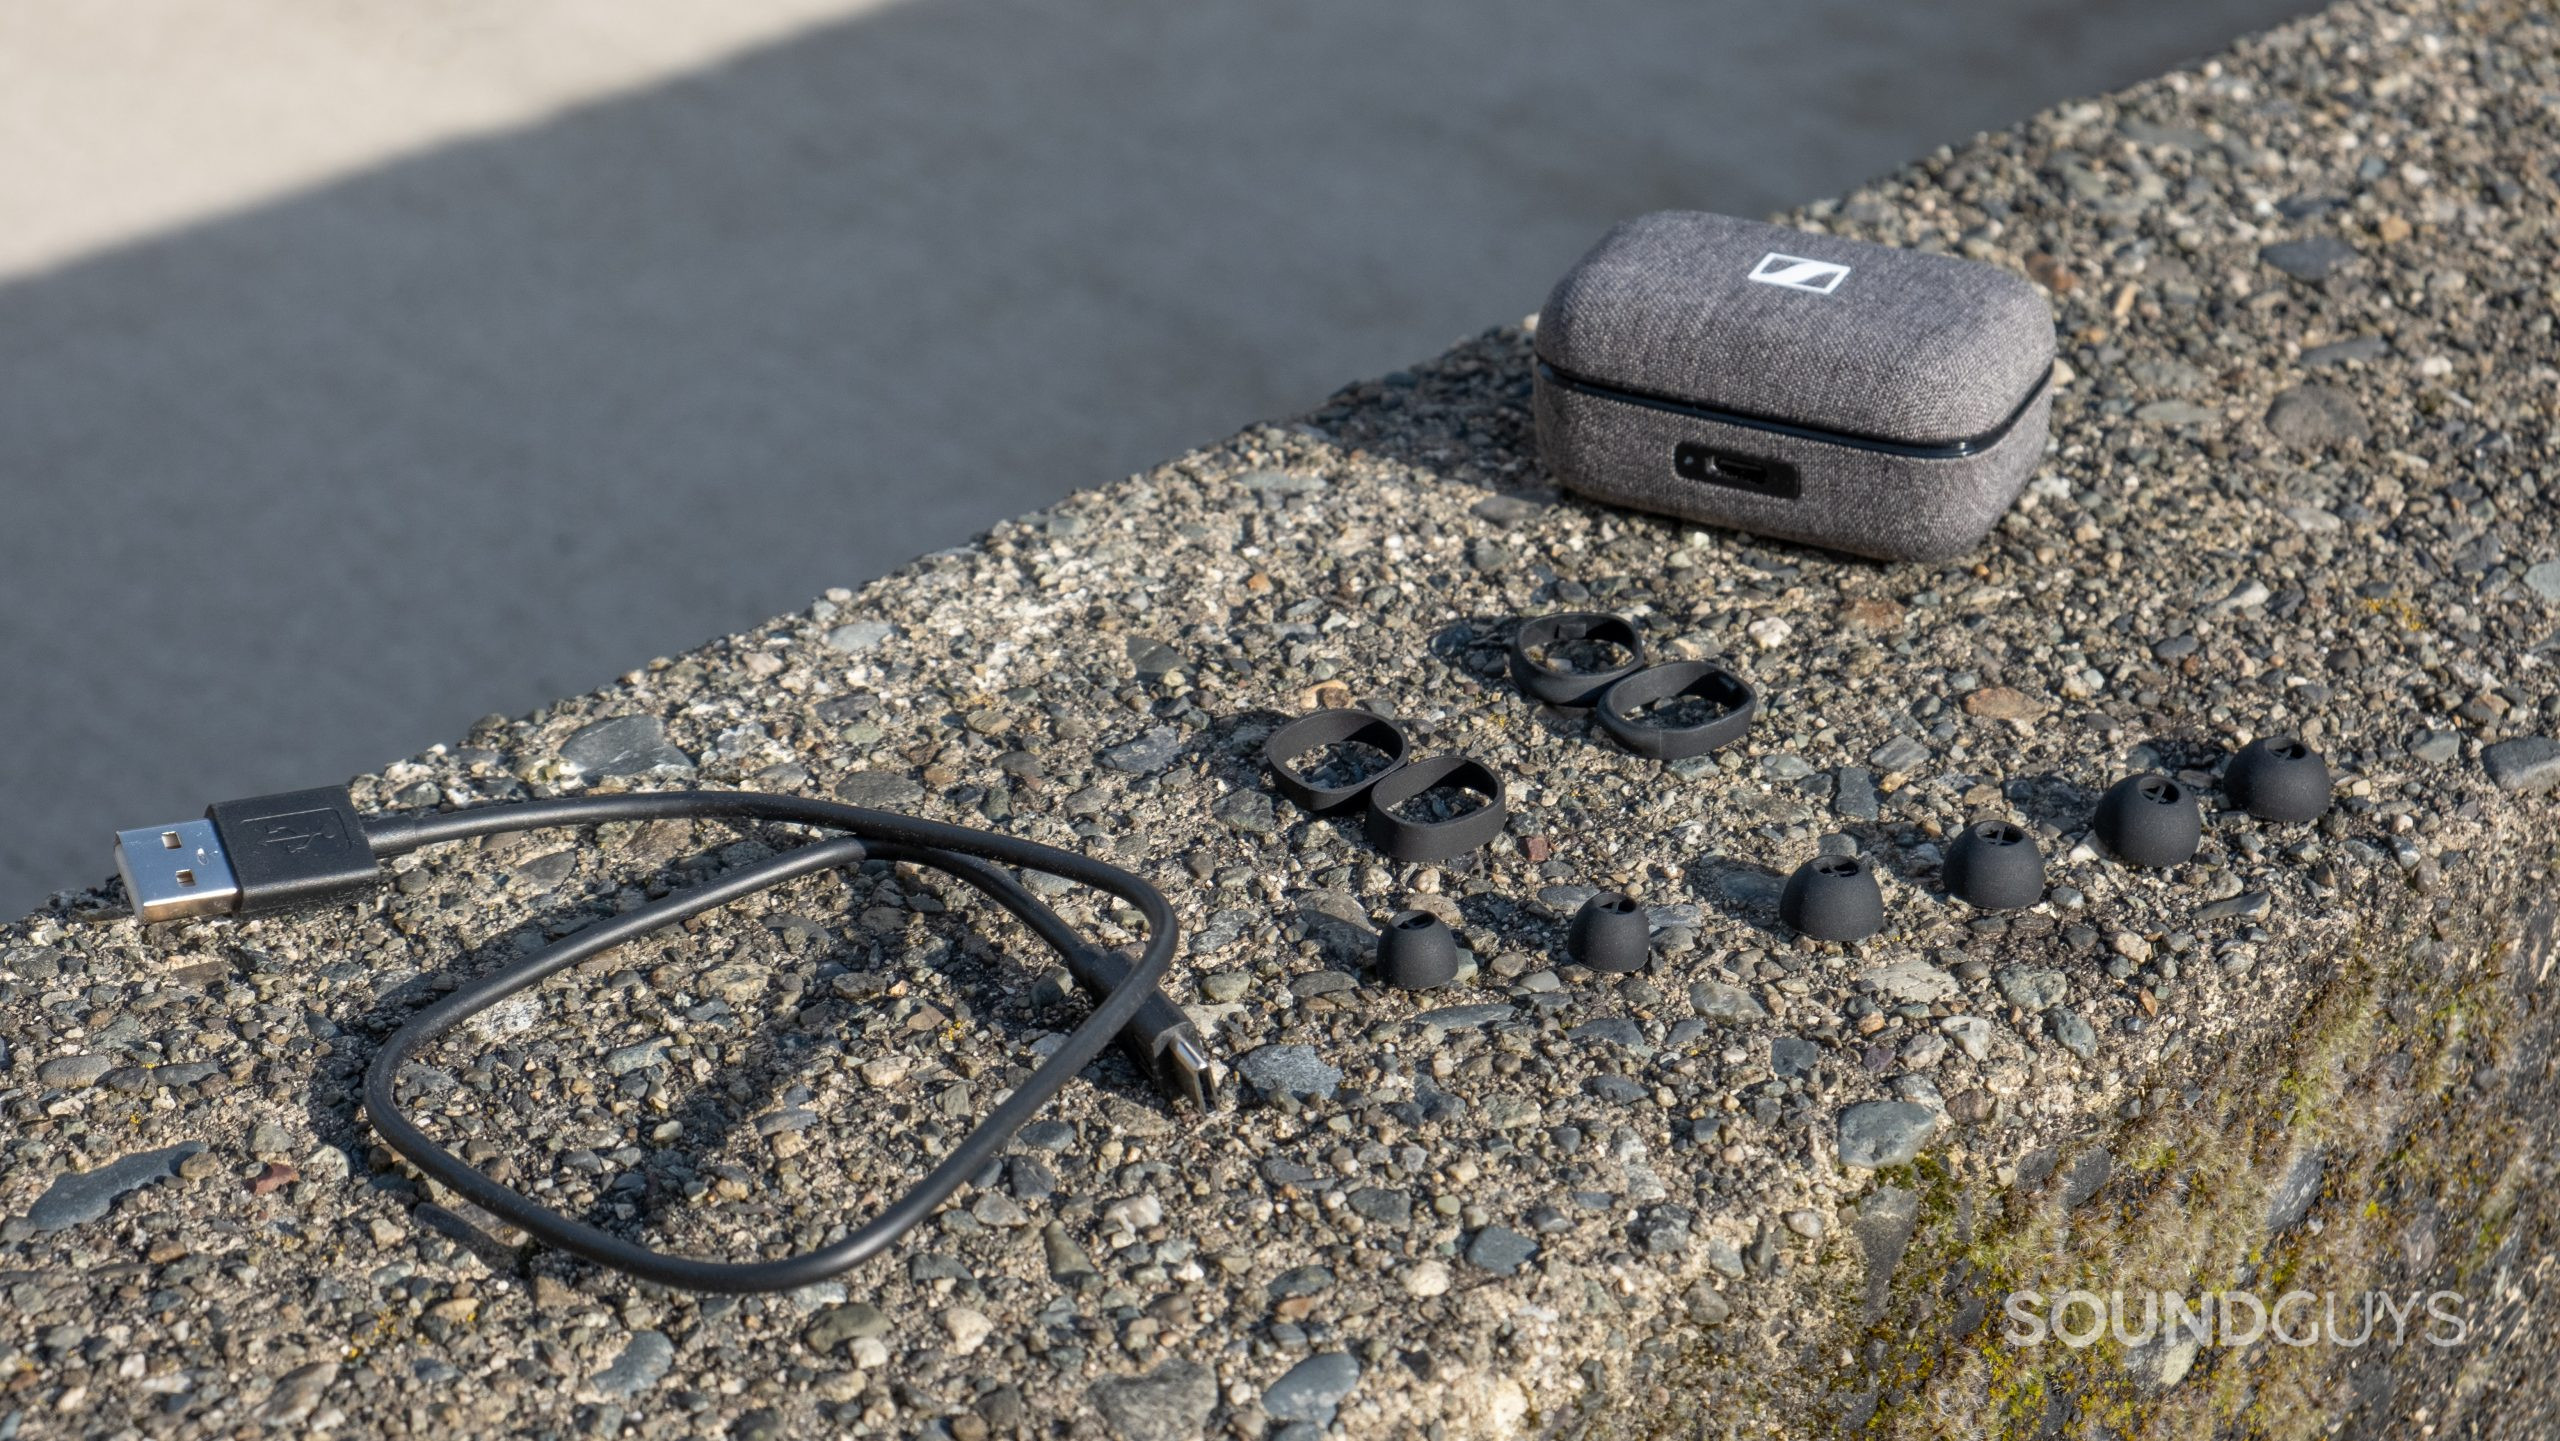 The ear tips, case, and stabilizers included with the Sennheiser MOMENTUM True Wireless 3 displayed on mossy concrete.